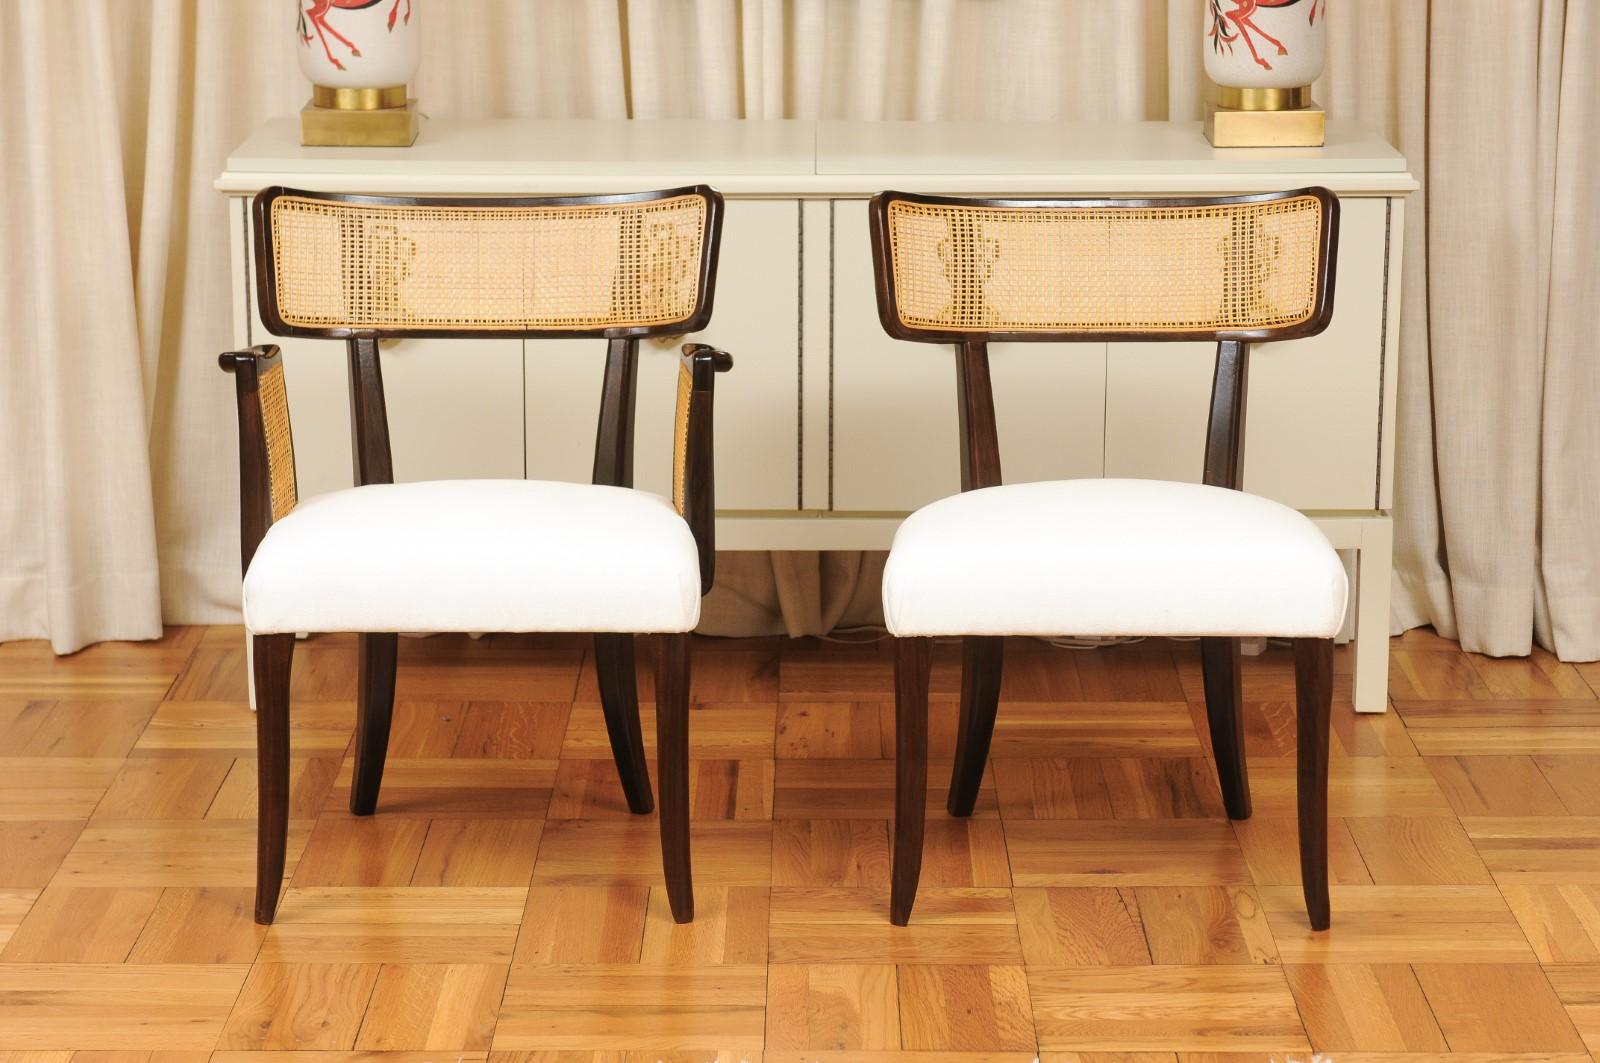 Mid-20th Century Gorgeous Restored Set of 8 Cane Dining Chairs by Wormley for Dunbar, circa 1948 For Sale